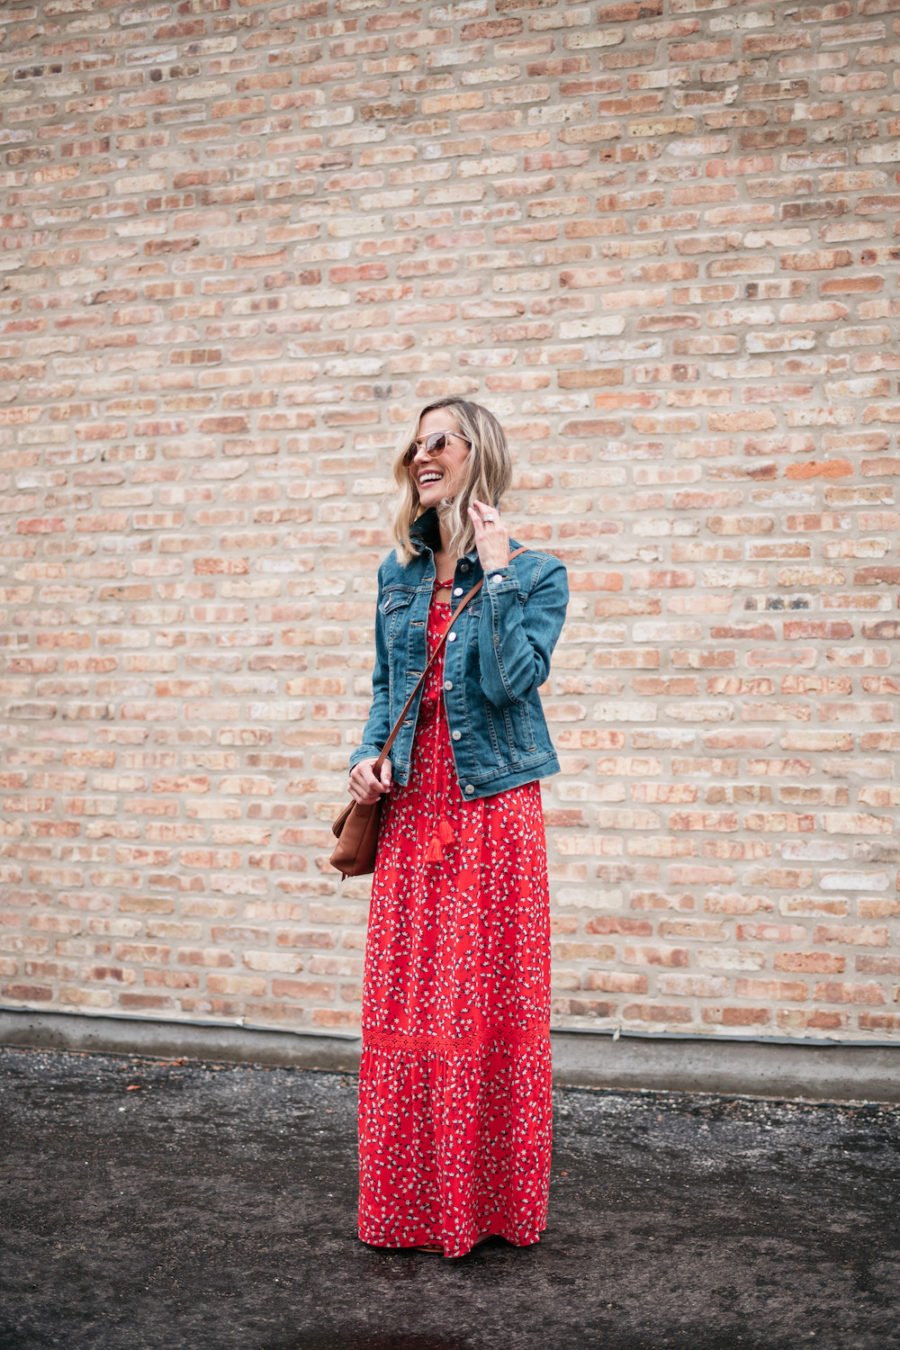 Blogging: wearing a red dress and denim jacket